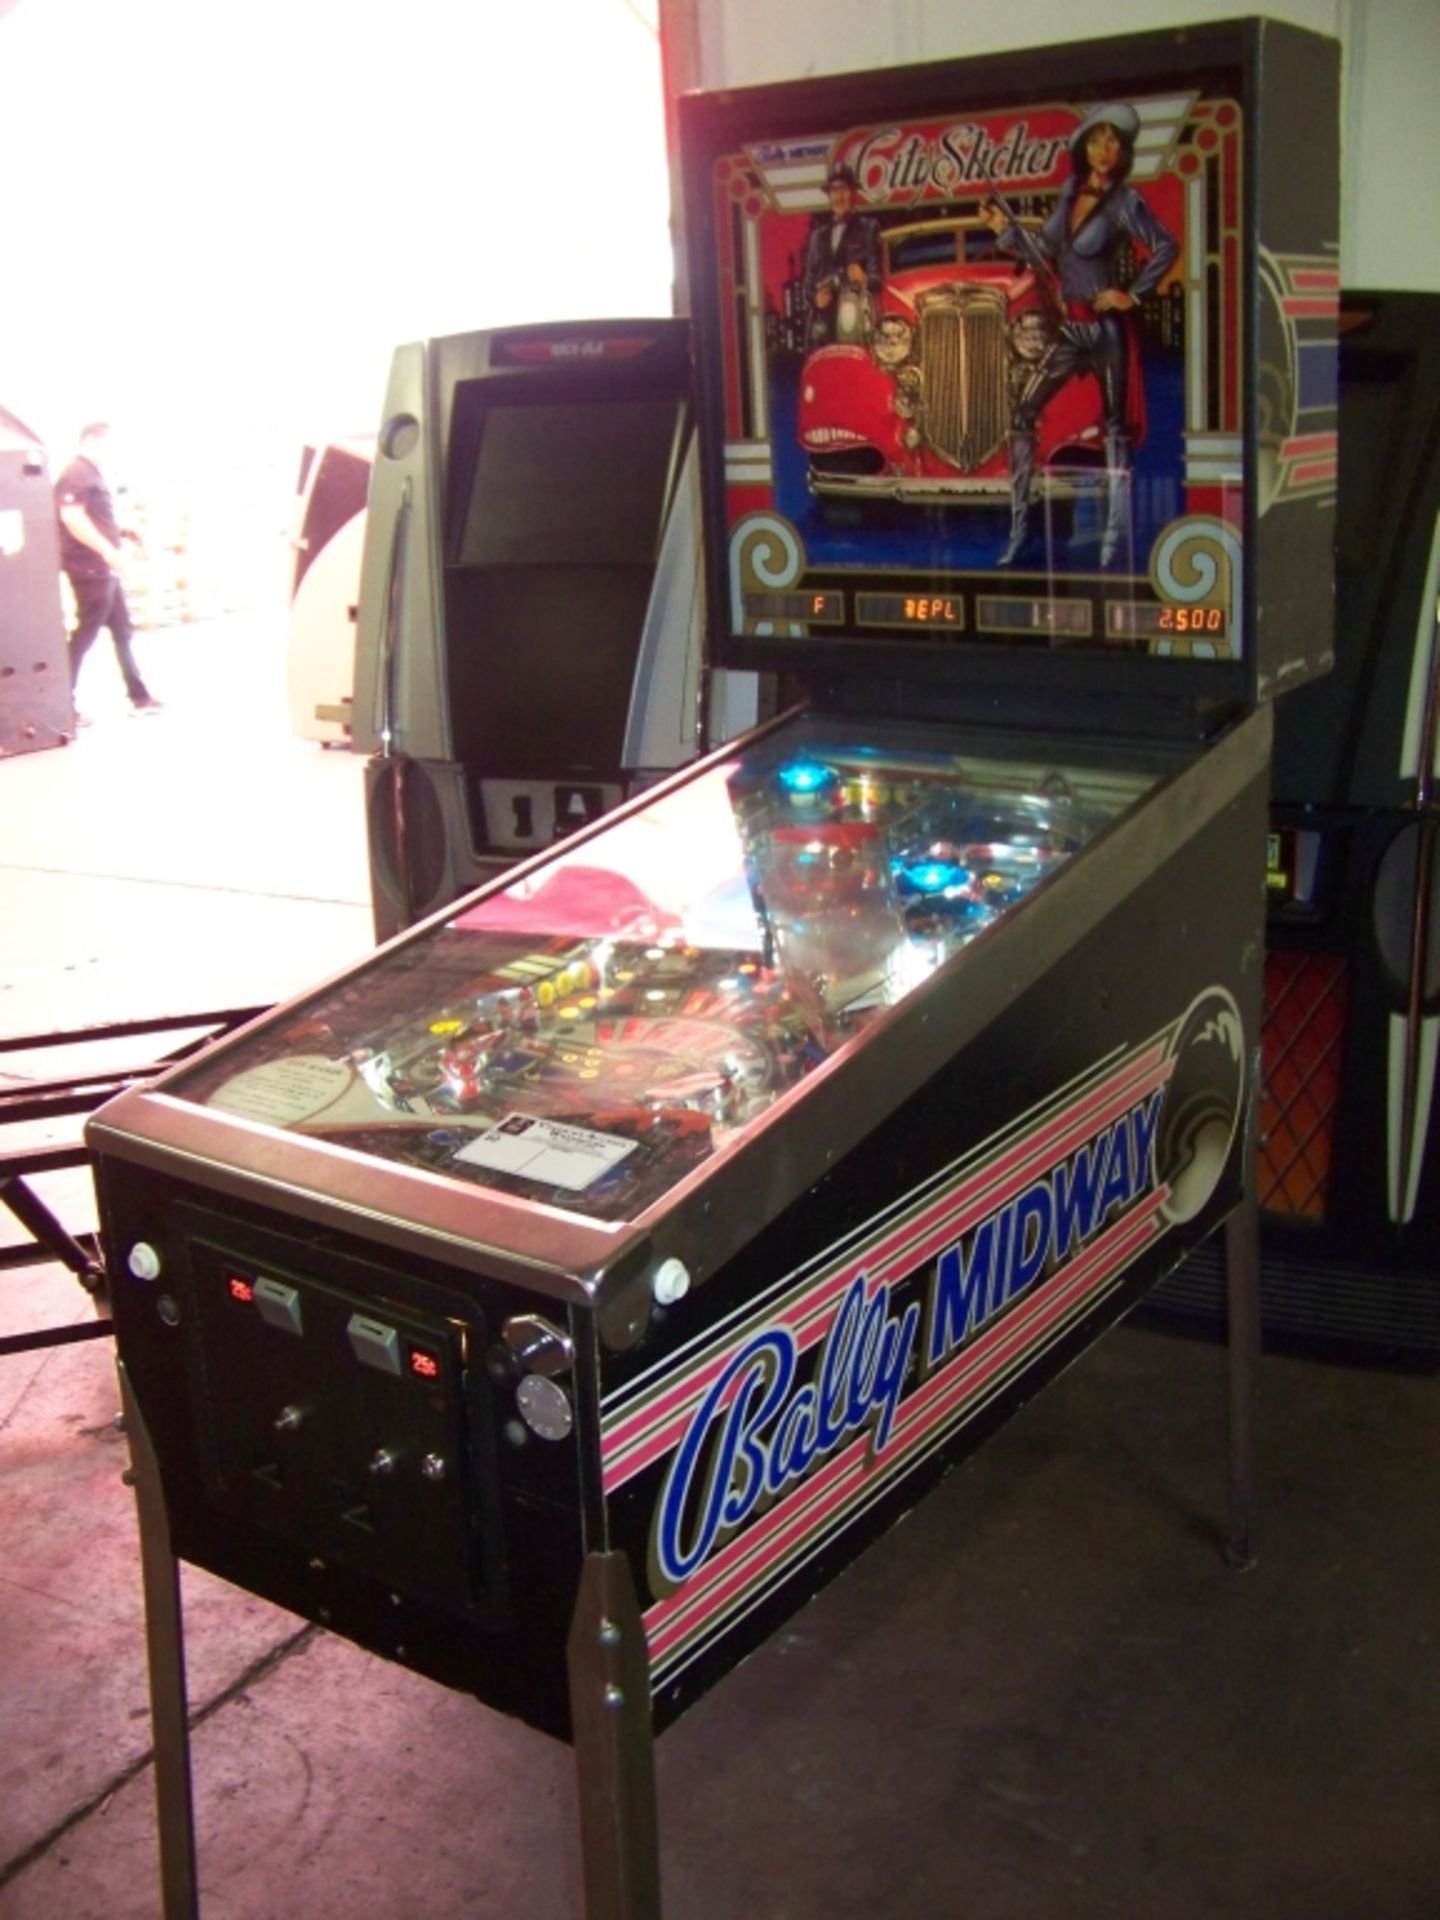 CITY SLICKER PINBALL MACHINE BALLY 1987 RARE! Item is in used condition. Evidence of wear and - Image 2 of 9